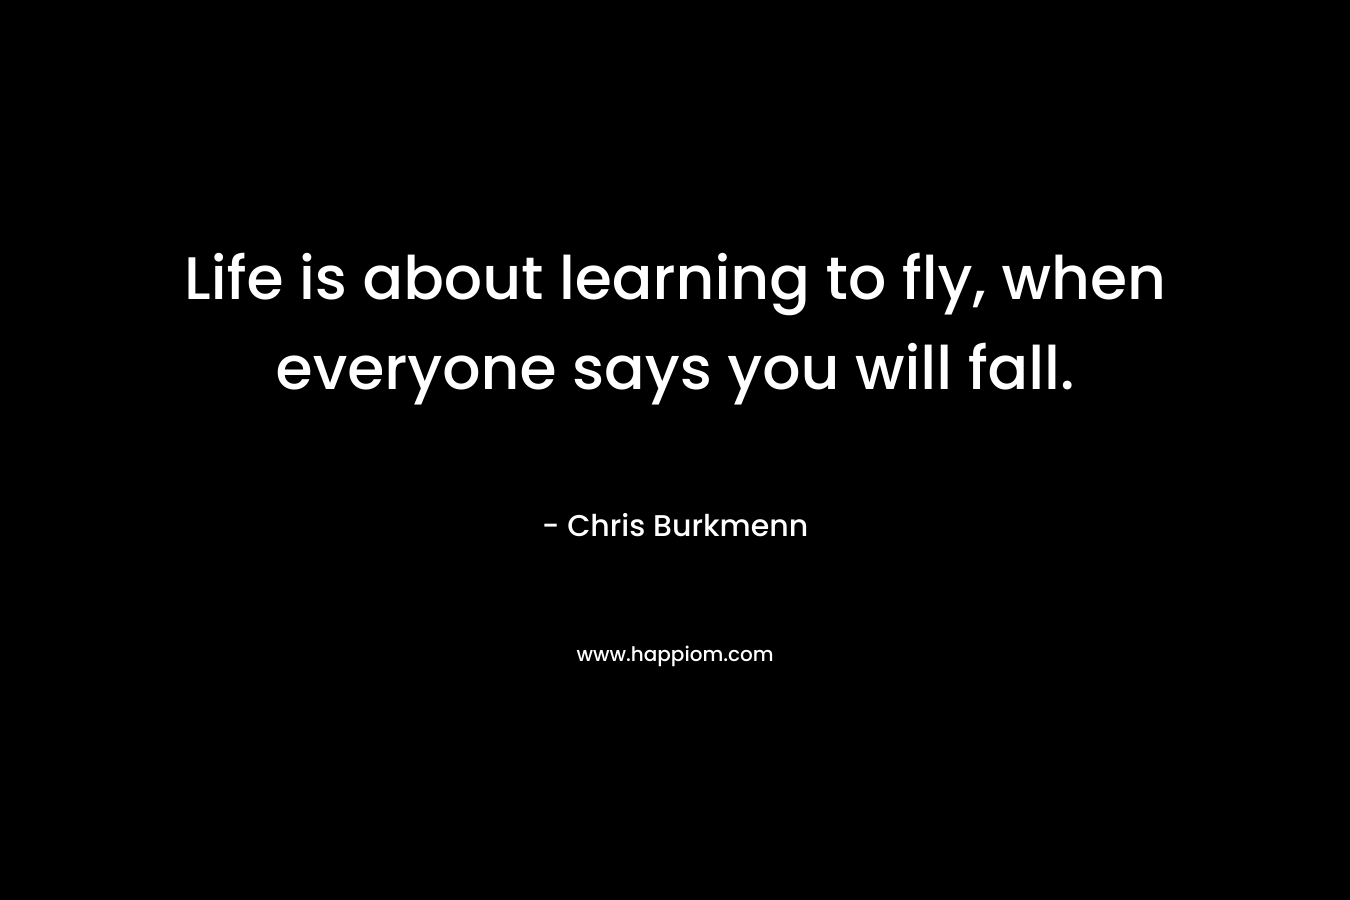 Life is about learning to fly, when everyone says you will fall.